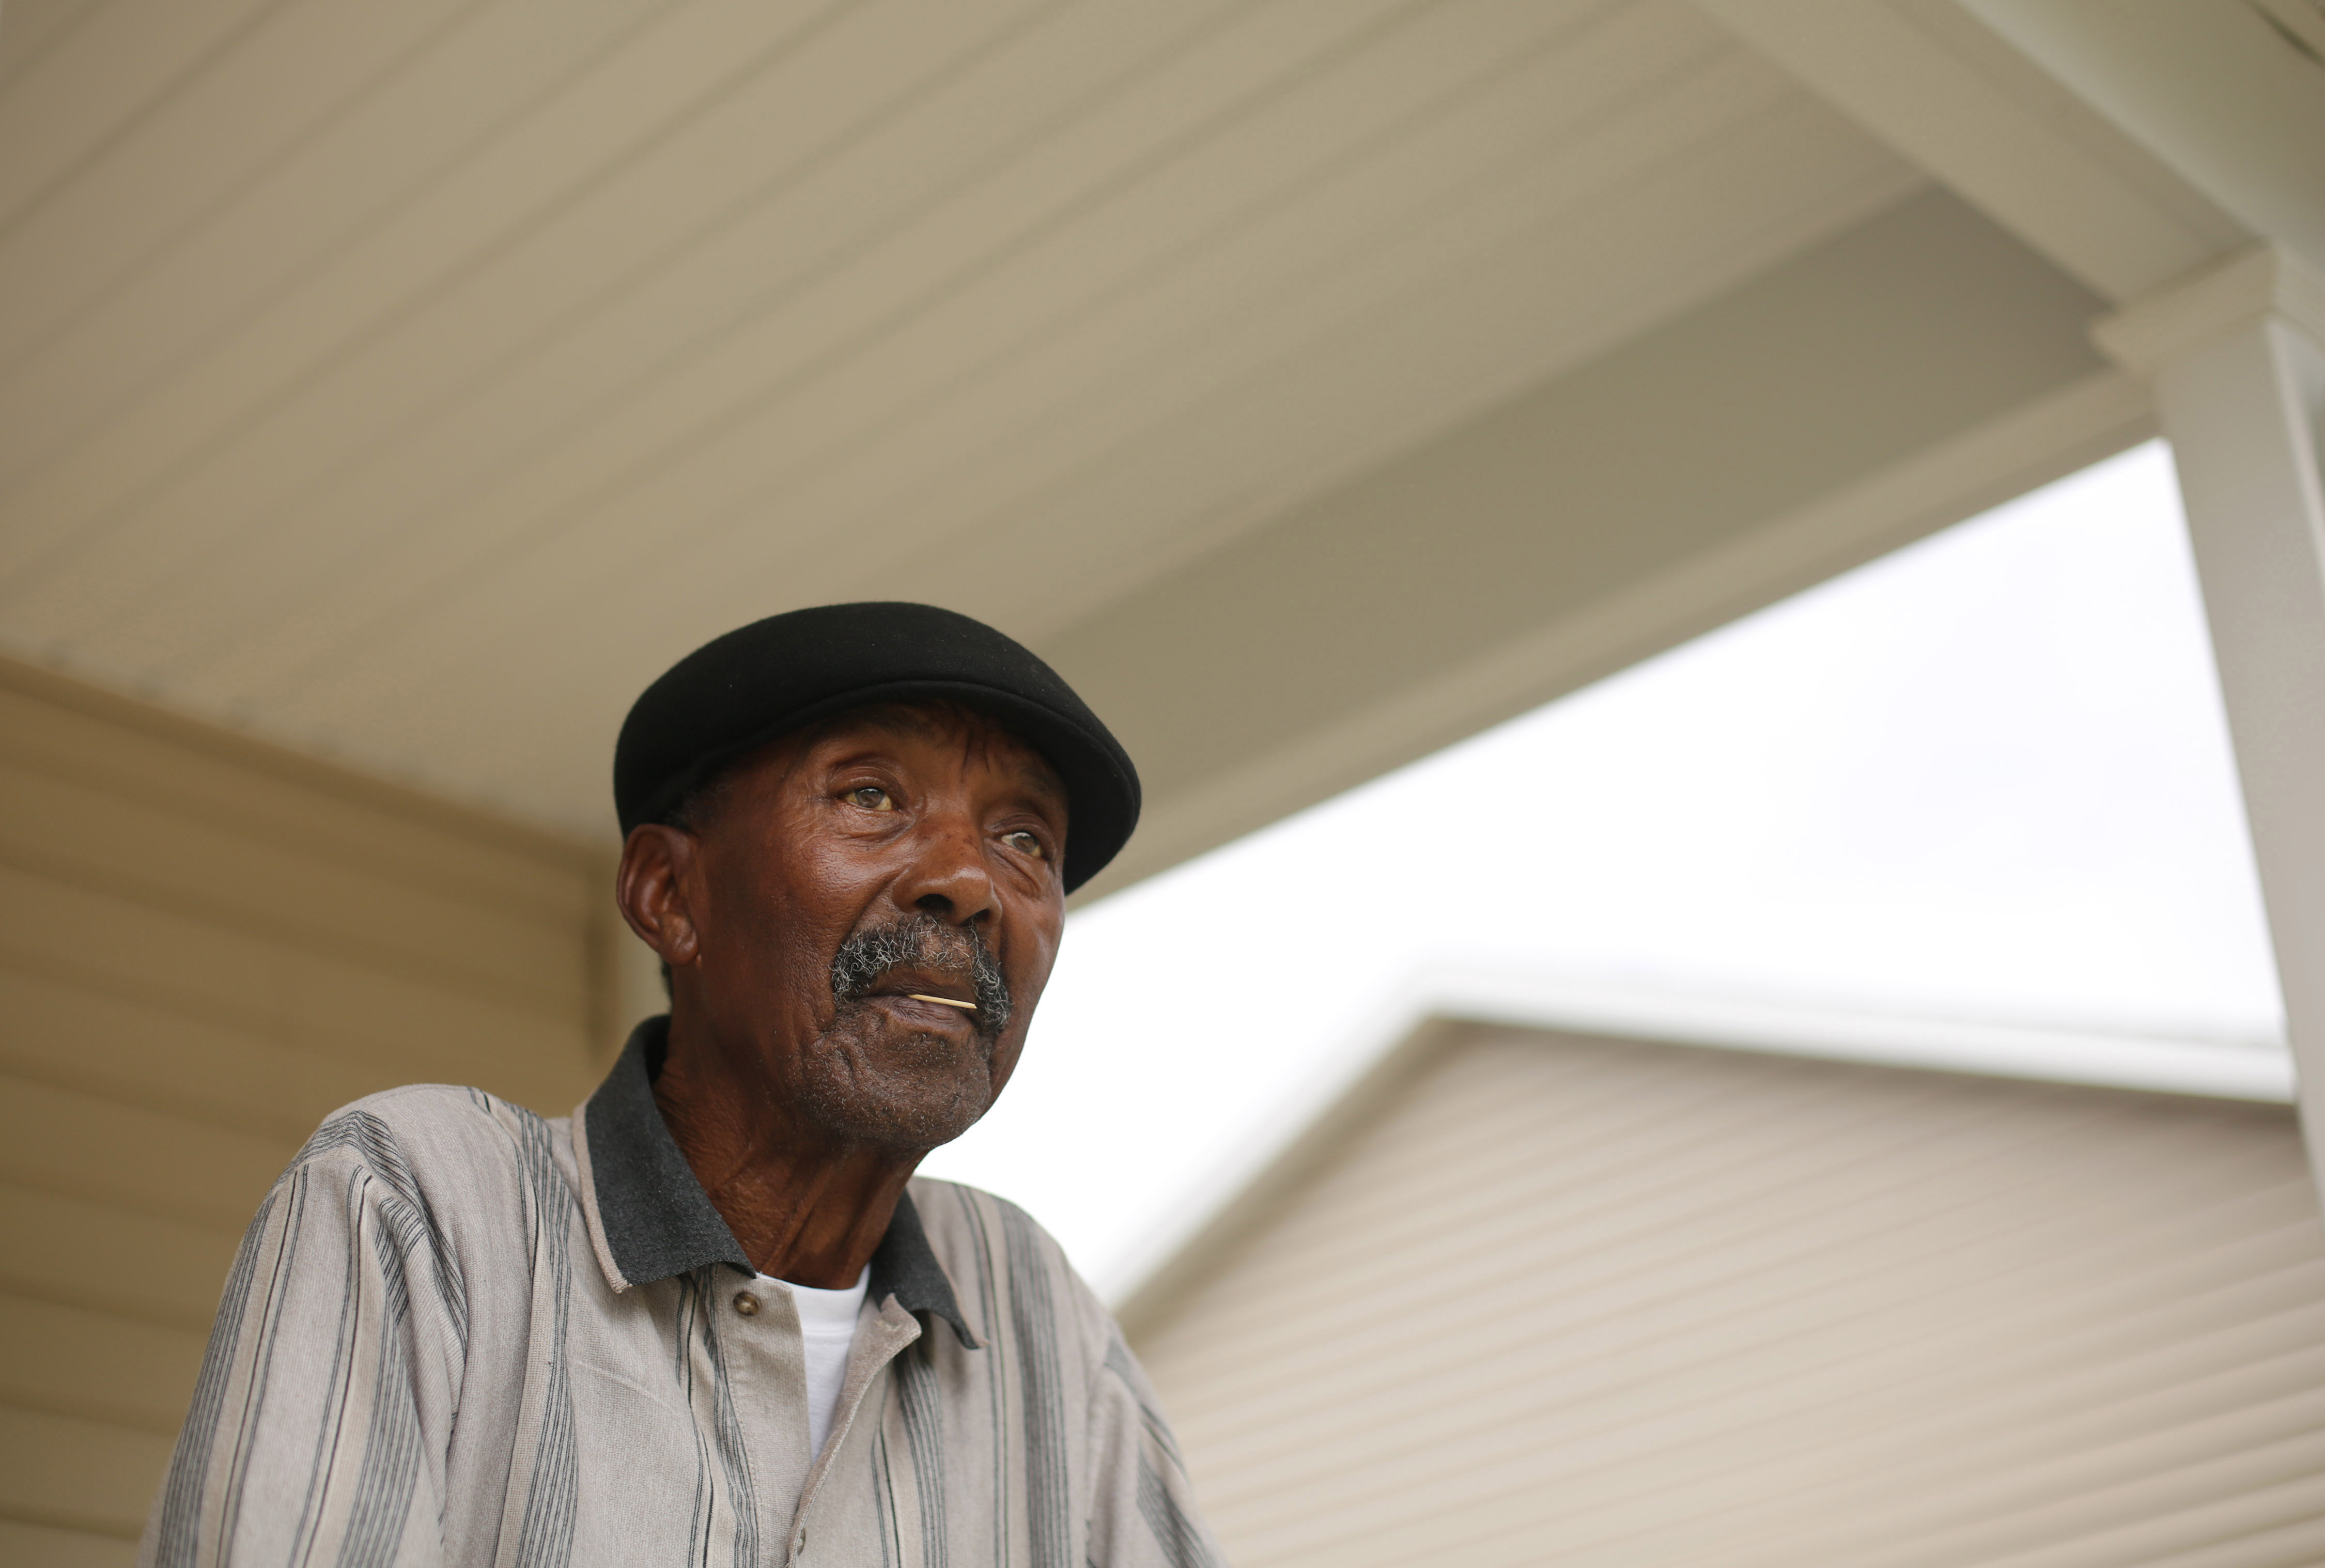 Burley Rogers, 83, was the original president of the New Road Community, located in Exmore, VA. Photographed on Sept. 13, 2022, Rogers was a leader in the Ô90s, pushing the town for indoor plumbing in the New Road homes.